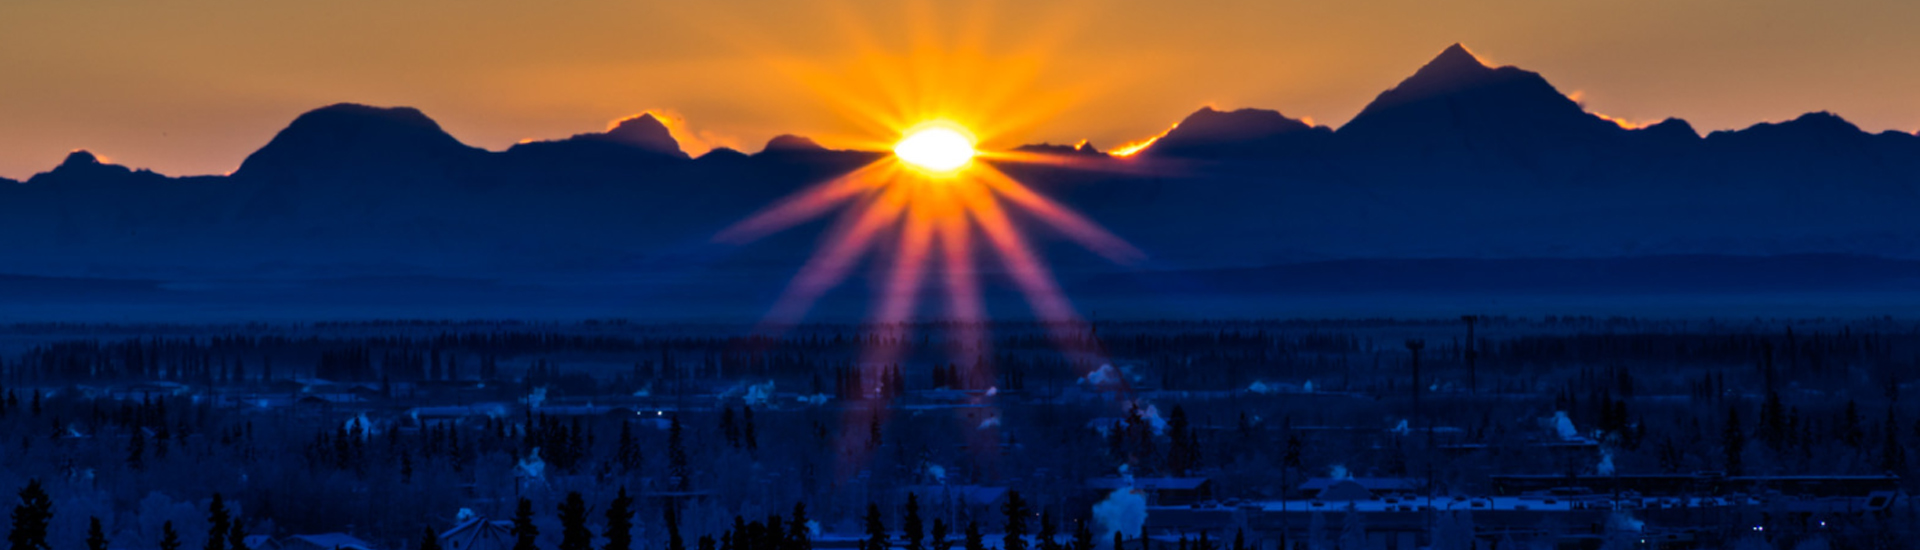 sun and mountains in winter